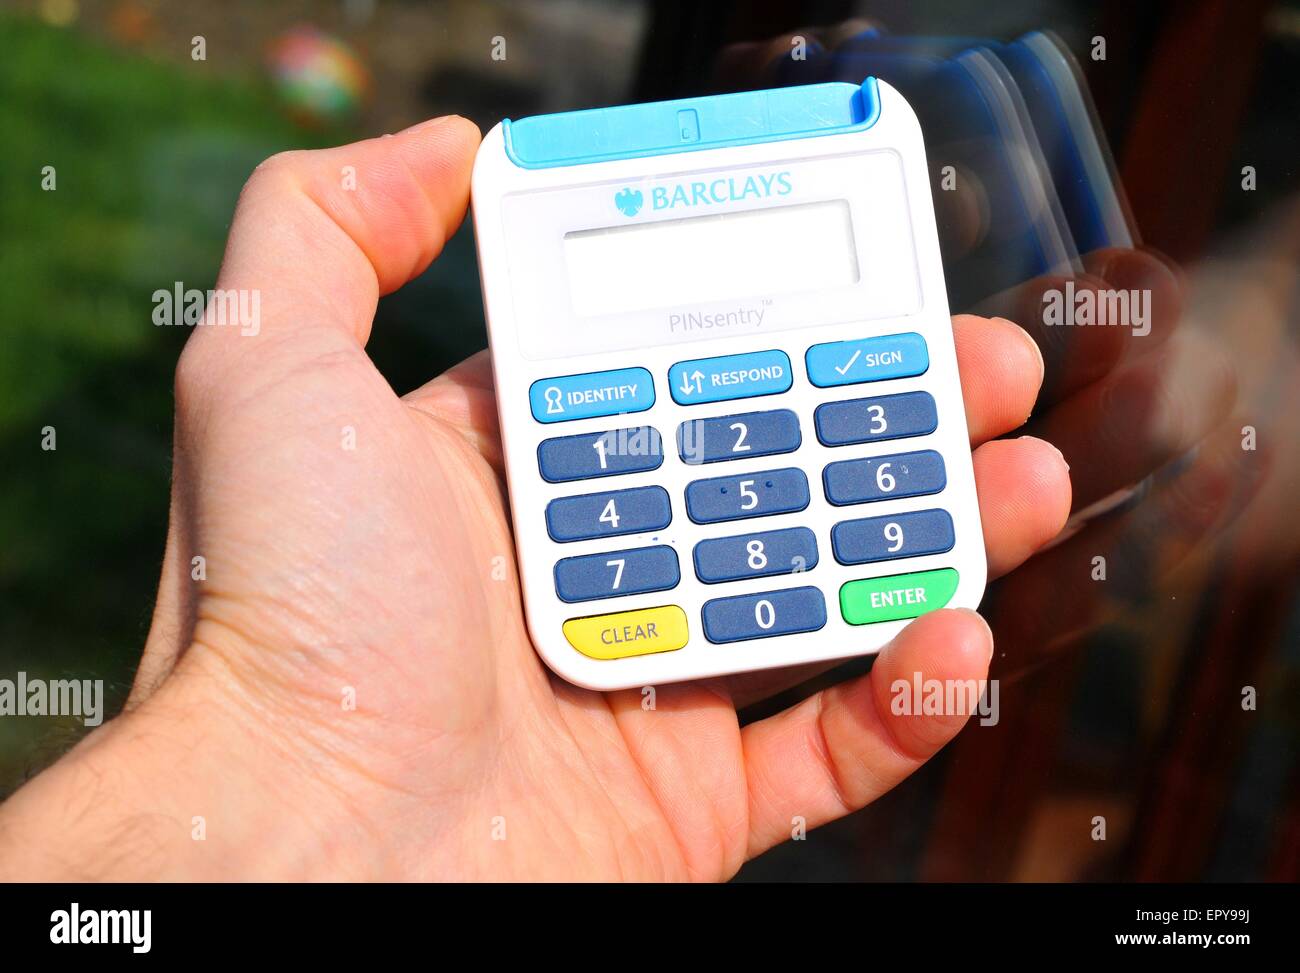 Online banking PINsentry security chip and pin card reader for authorising transactions through Barclays Bank account Stock Photo